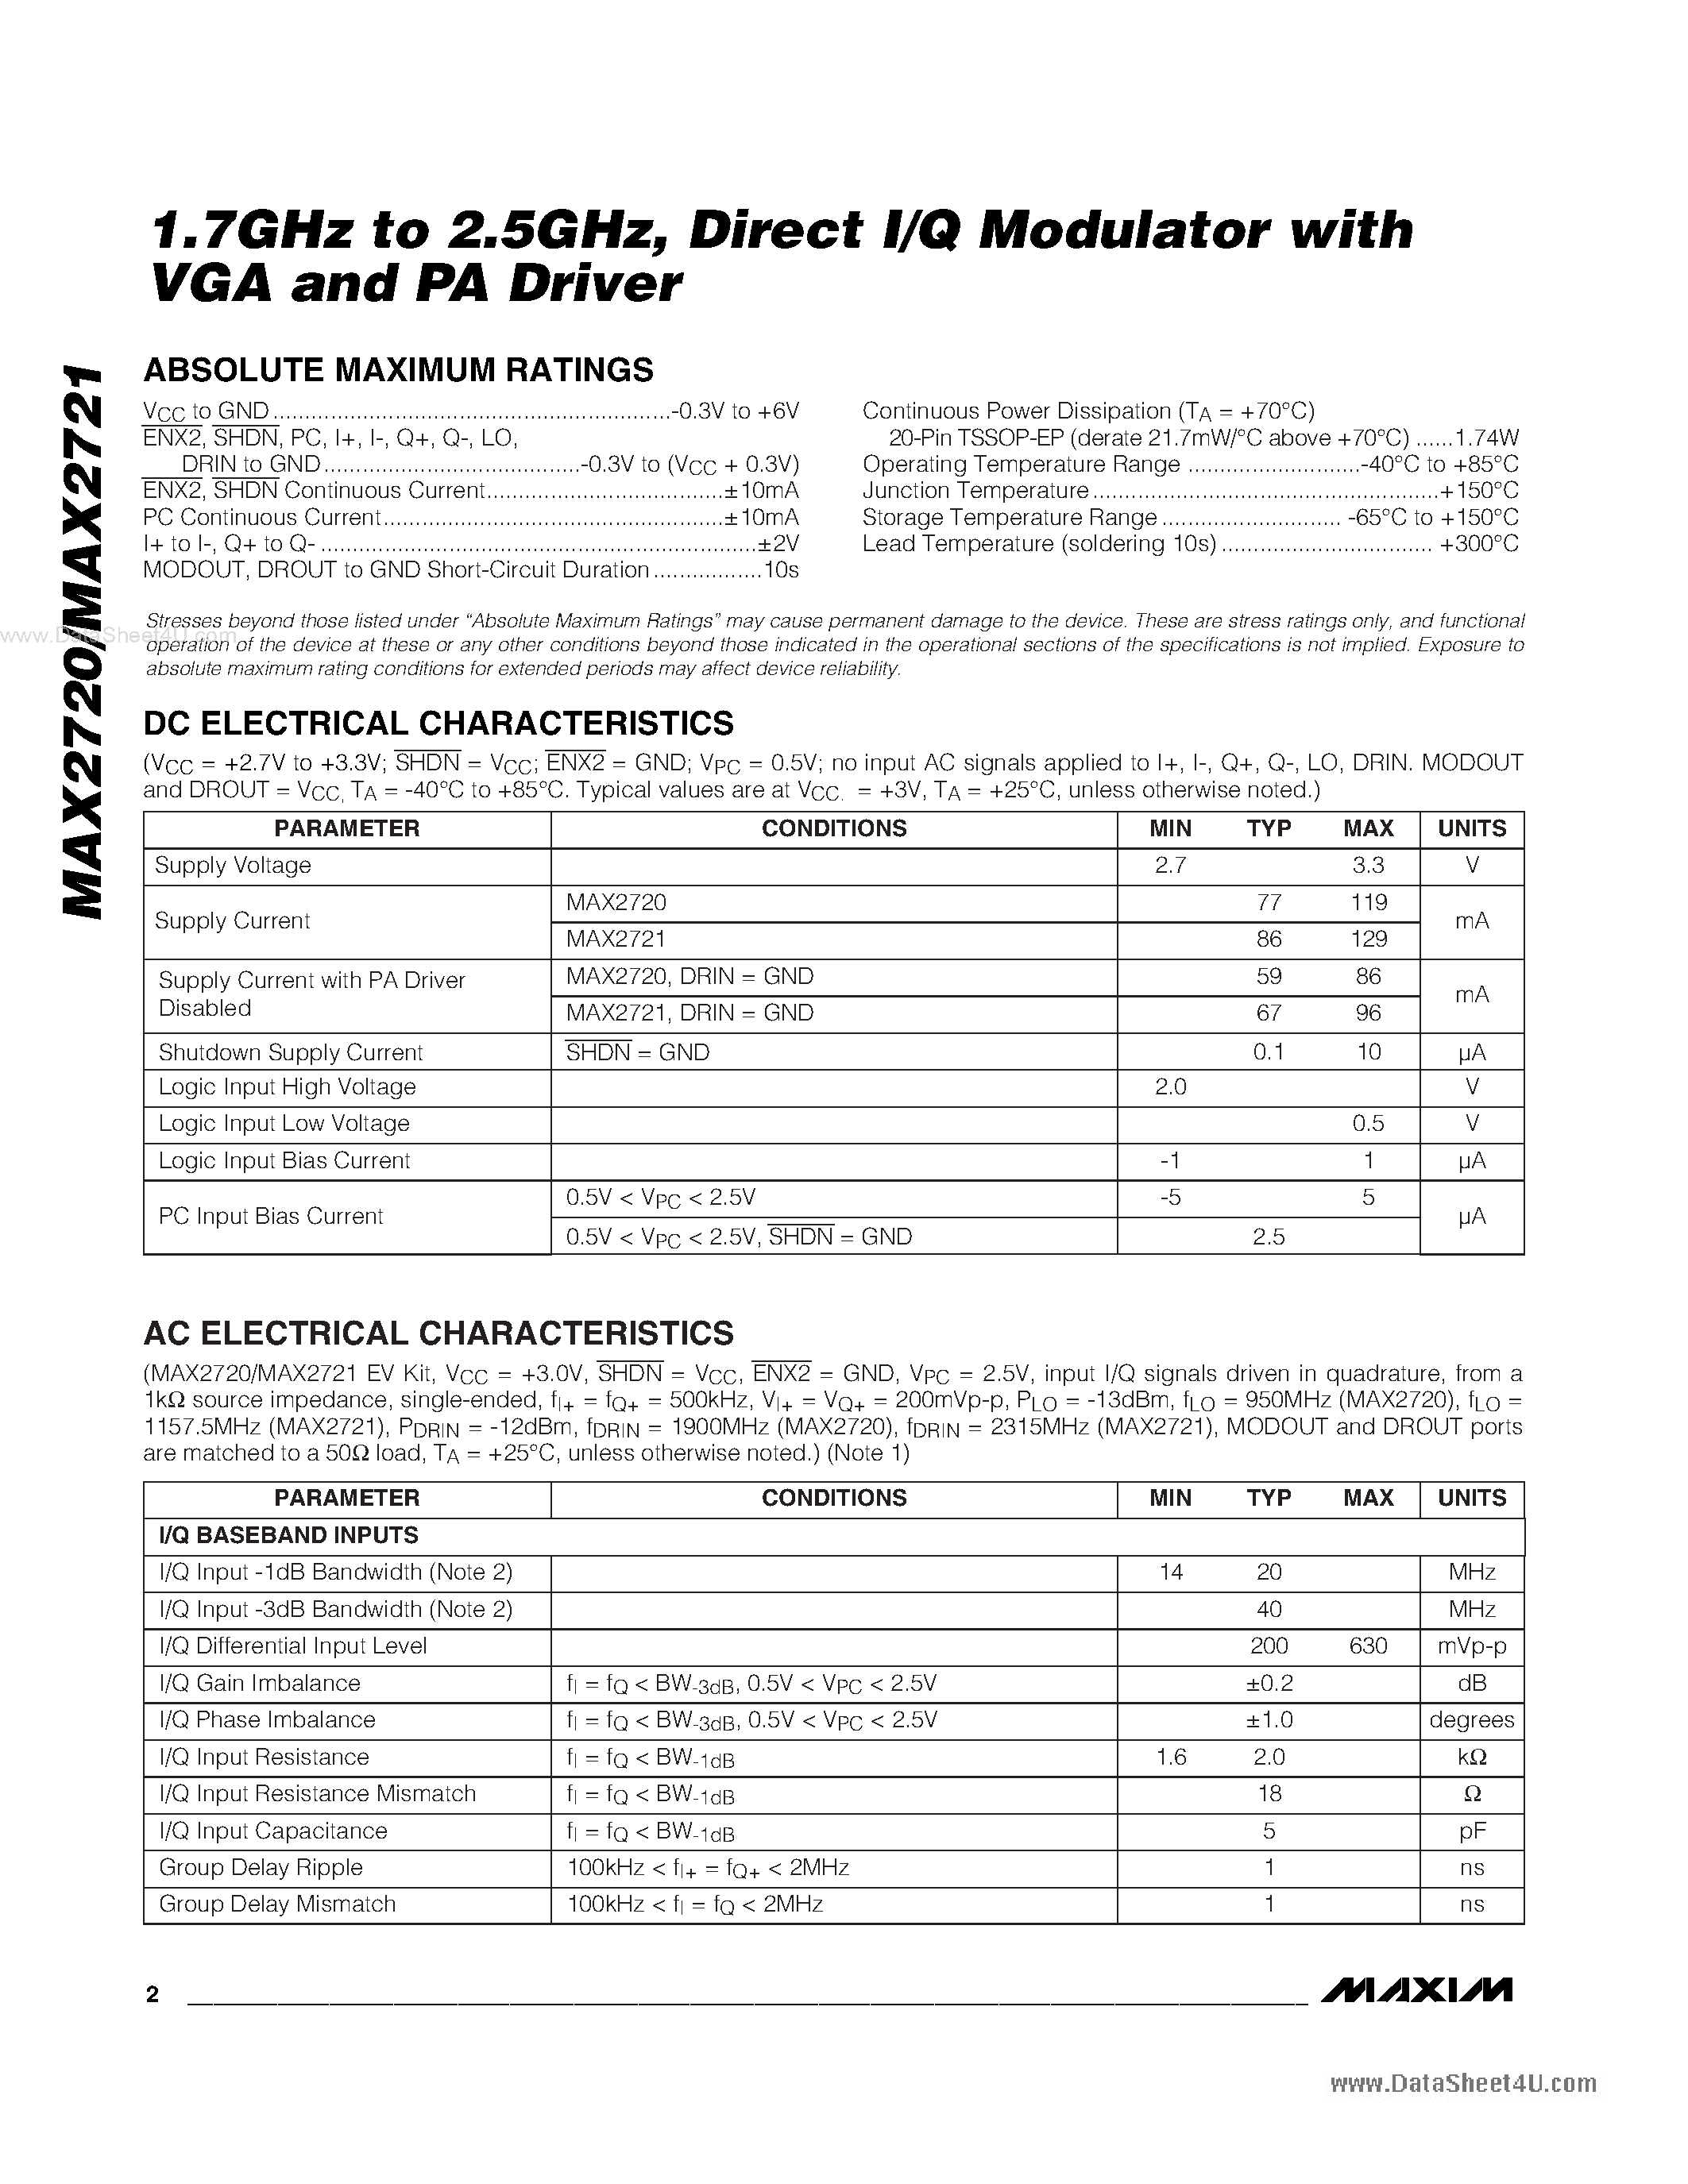 Datasheet MAX2720-MAX2721 - 1.7GHz to 2.5GHz / Direct I/Q Modulator with VGA and PA Driver page 2